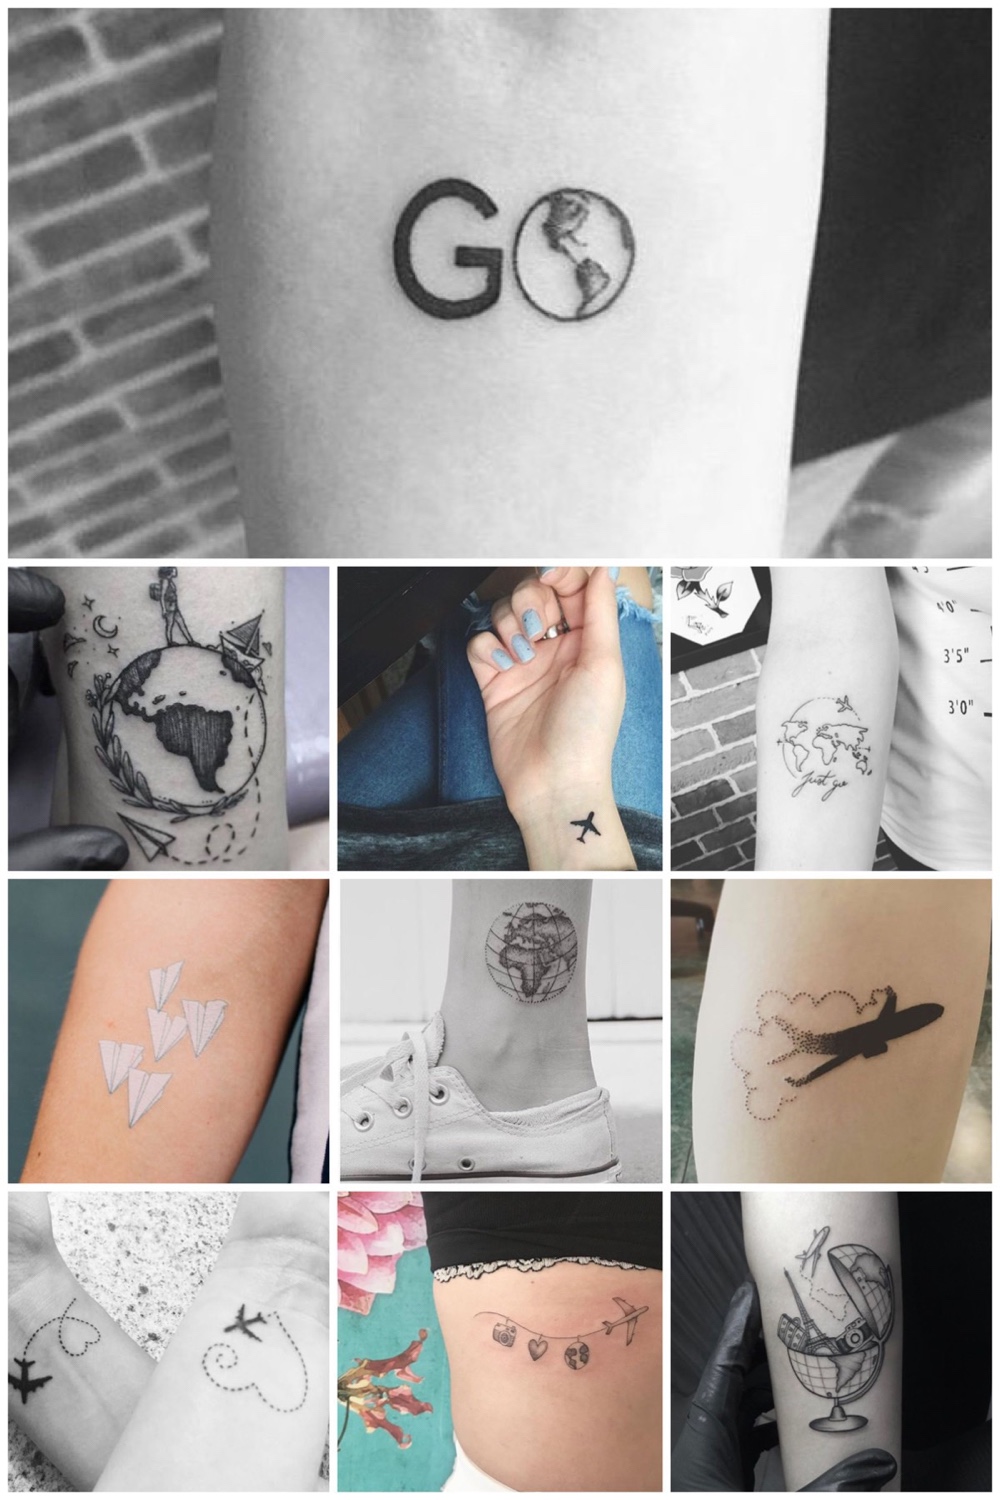 great inspiration for travel tattoos